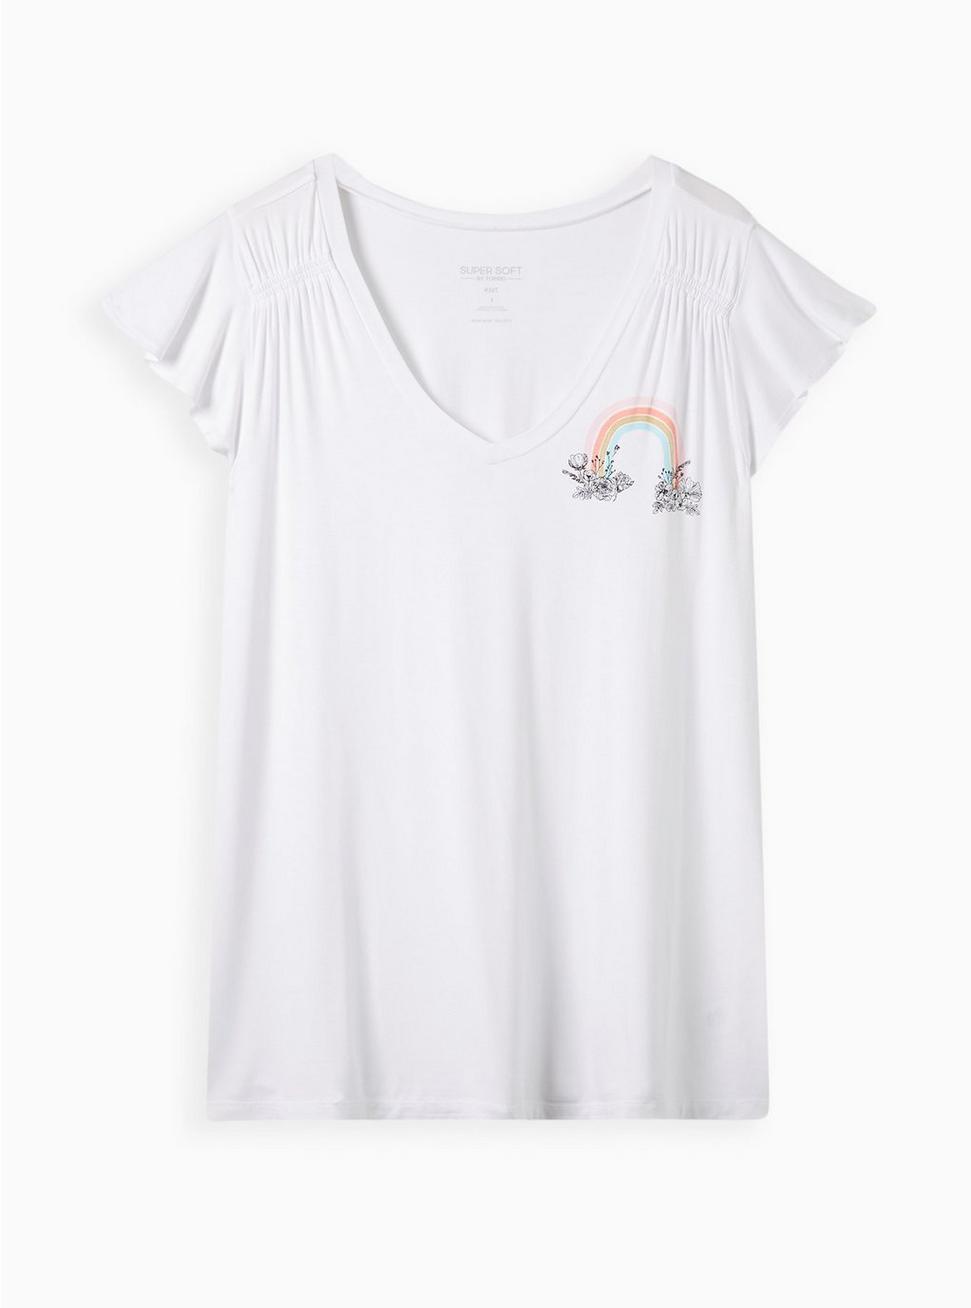 Graphic Classic Fit Super Soft Flutter Sleeve Tee, RAINBOW WHITE, hi-res